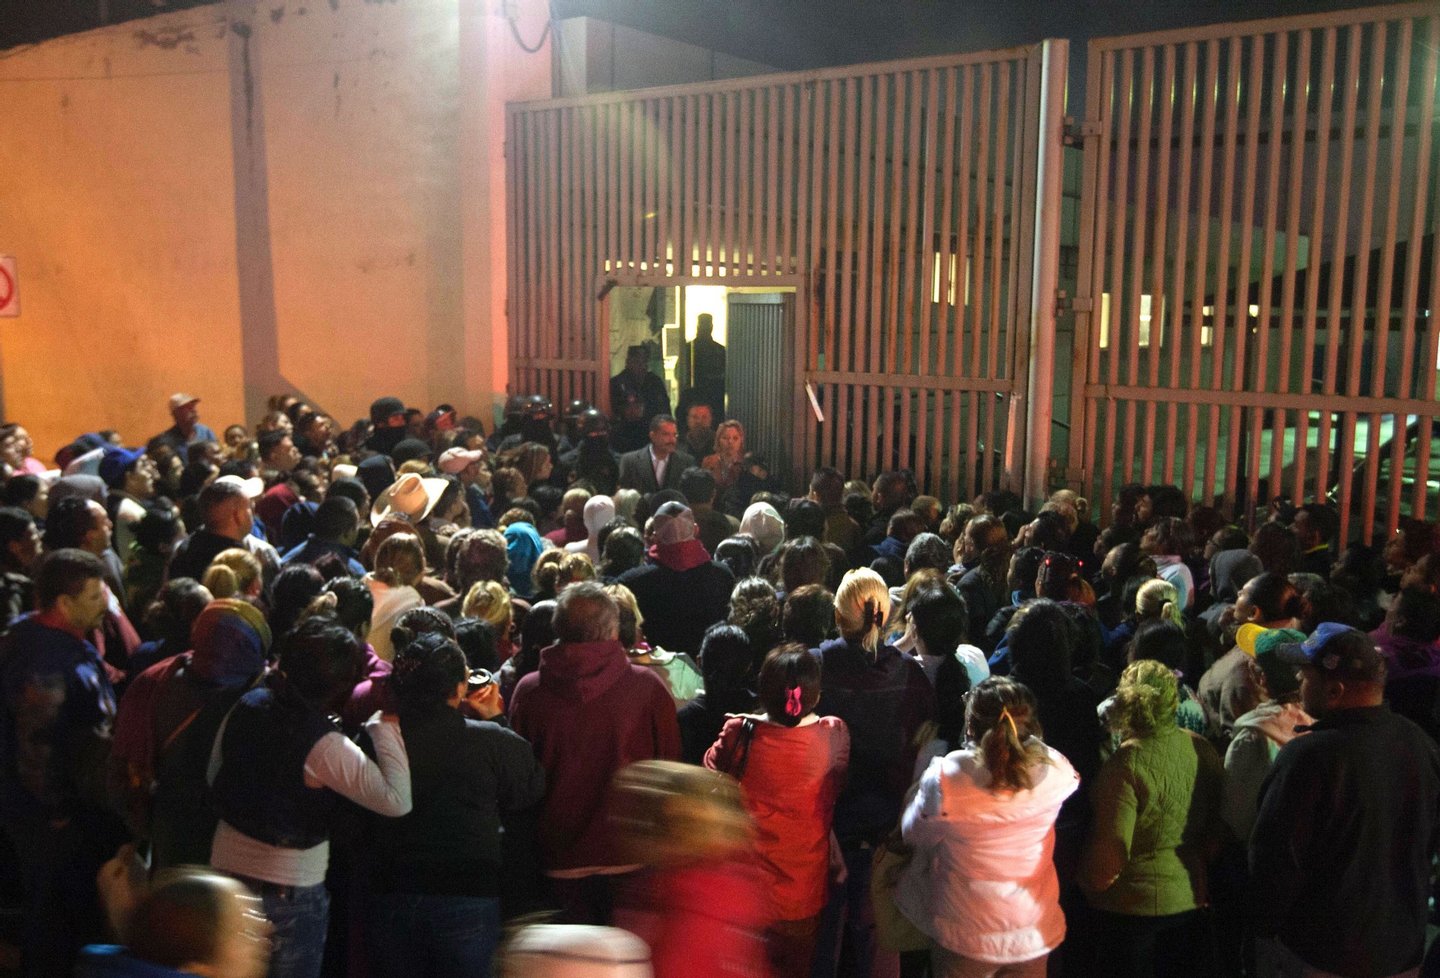 Relatives of inmates gather outside the Topo Chico prison in the northern city of Monterrey in Mexico where according to local media at least 30 people died in a prison riot on February 11, 2016. Riot police and ambulances were deployed at the Topo Chico prison as smoke billowed from the facility. Broadcaster Televisa reported that 30 died while Milenio television spoke of 50 victims, with inmates and prison guards among them. AFP PHOTO / JULIO CESAR AGUILAR / AFP / Julio Cesar Aguilar (Photo credit should read JULIO CESAR AGUILAR/AFP/Getty Images)